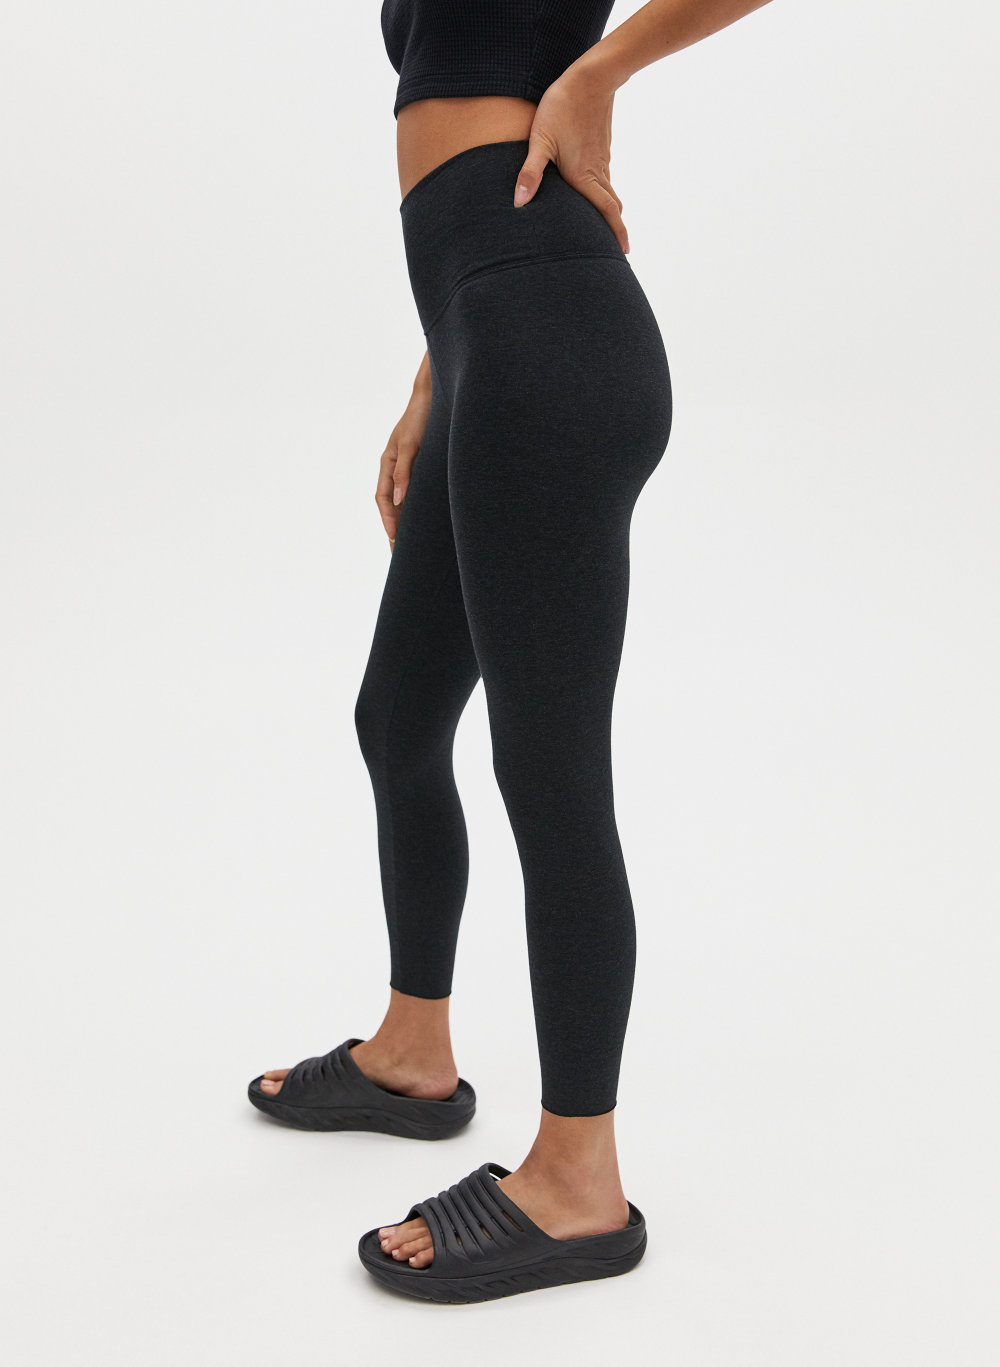 Aritzia Tna Leggings Reviewed Articles  International Society of Precision  Agriculture